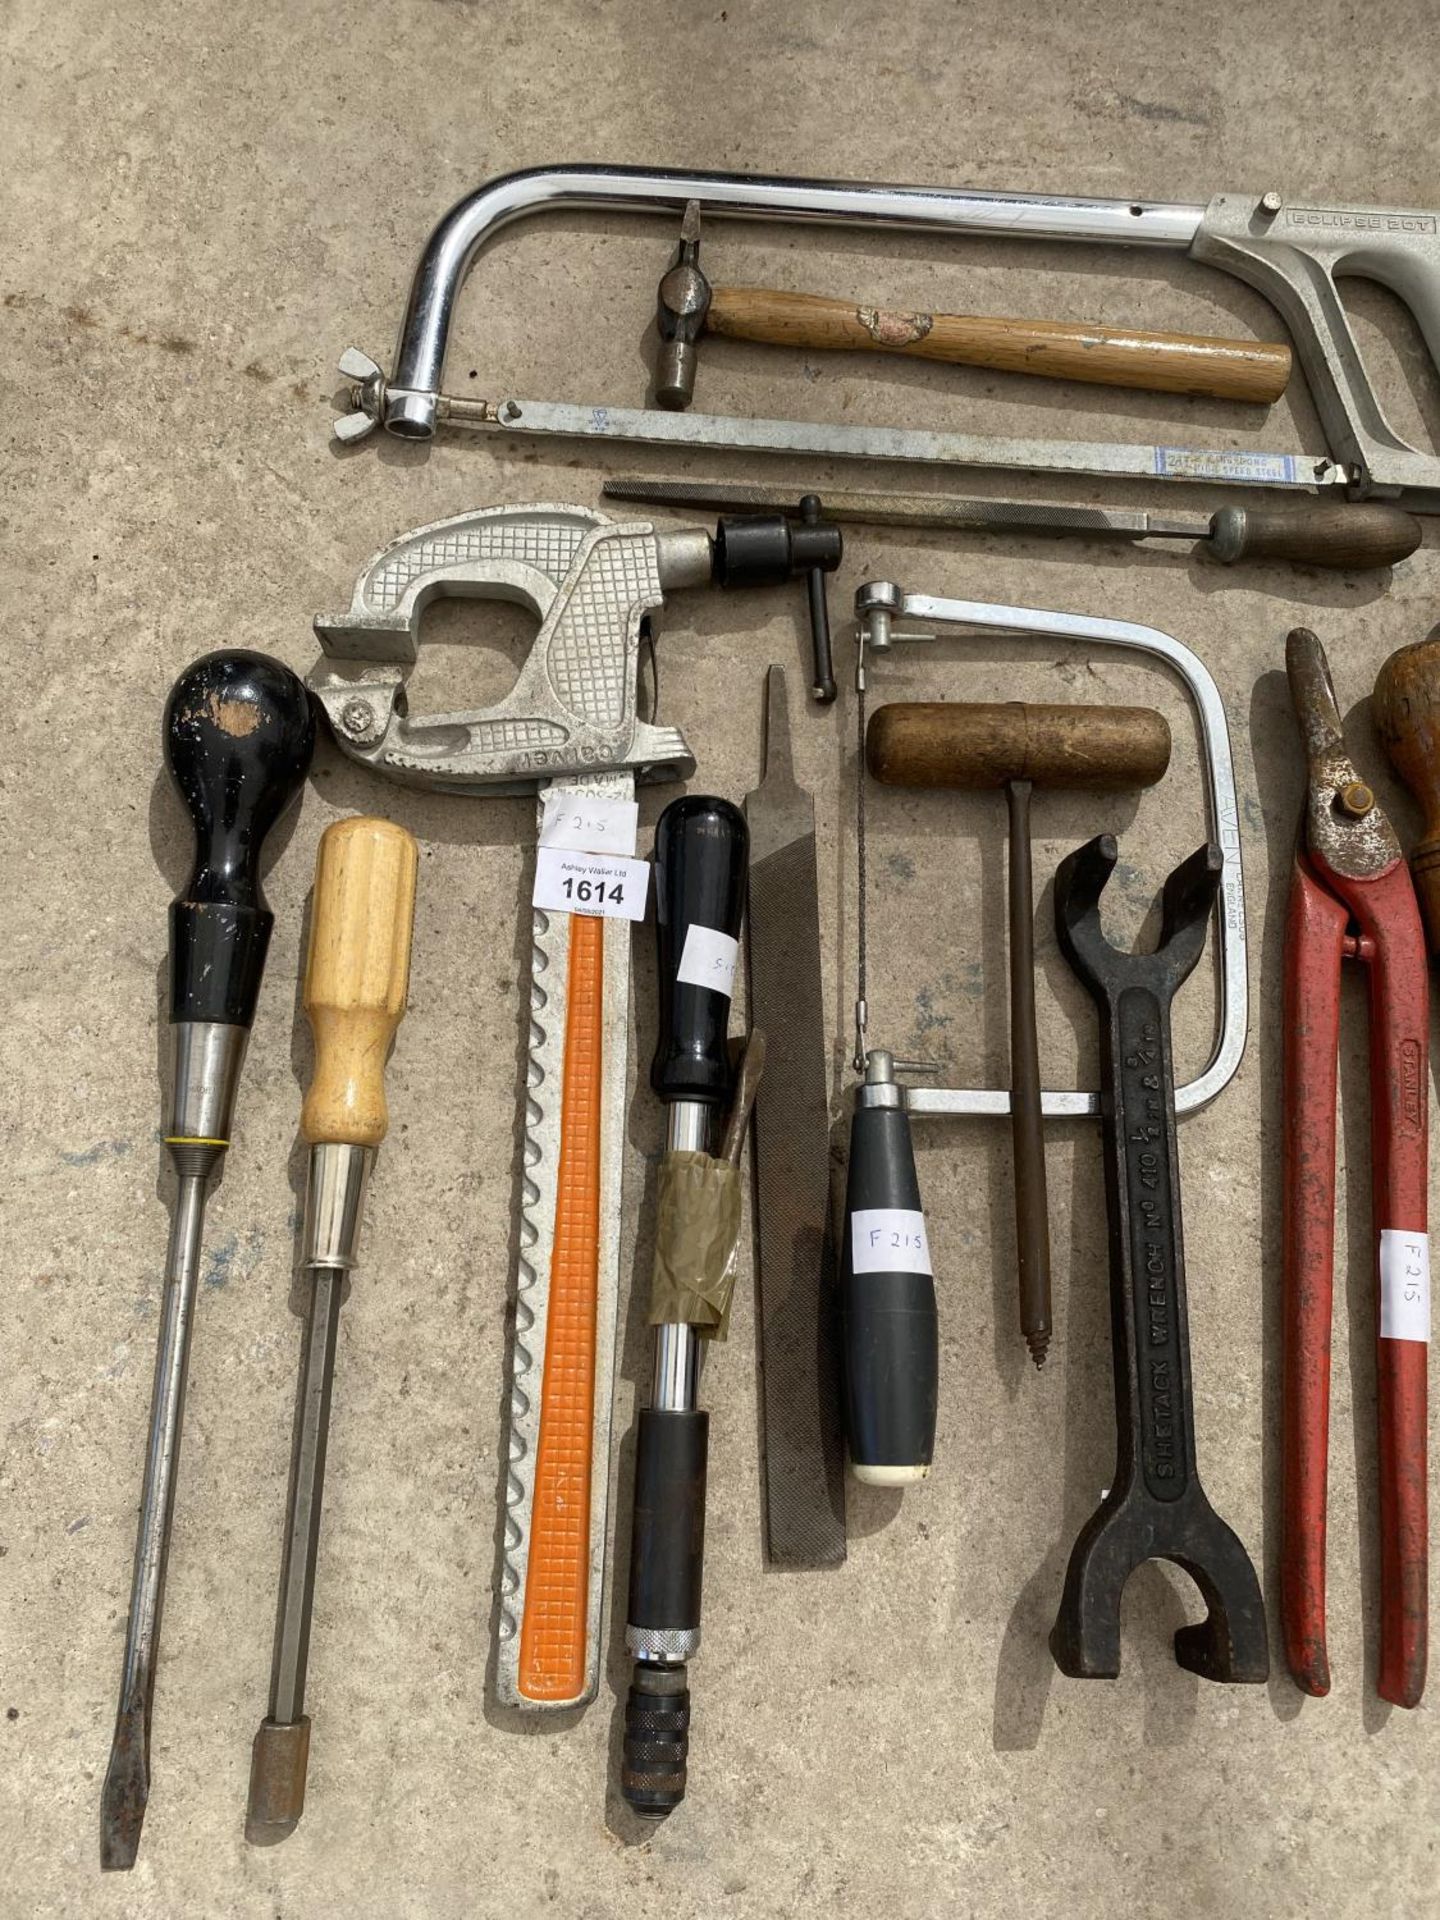 VARIOUS TOOLS - SCREWDRIVERS, CLAMPS ETC - Image 2 of 3